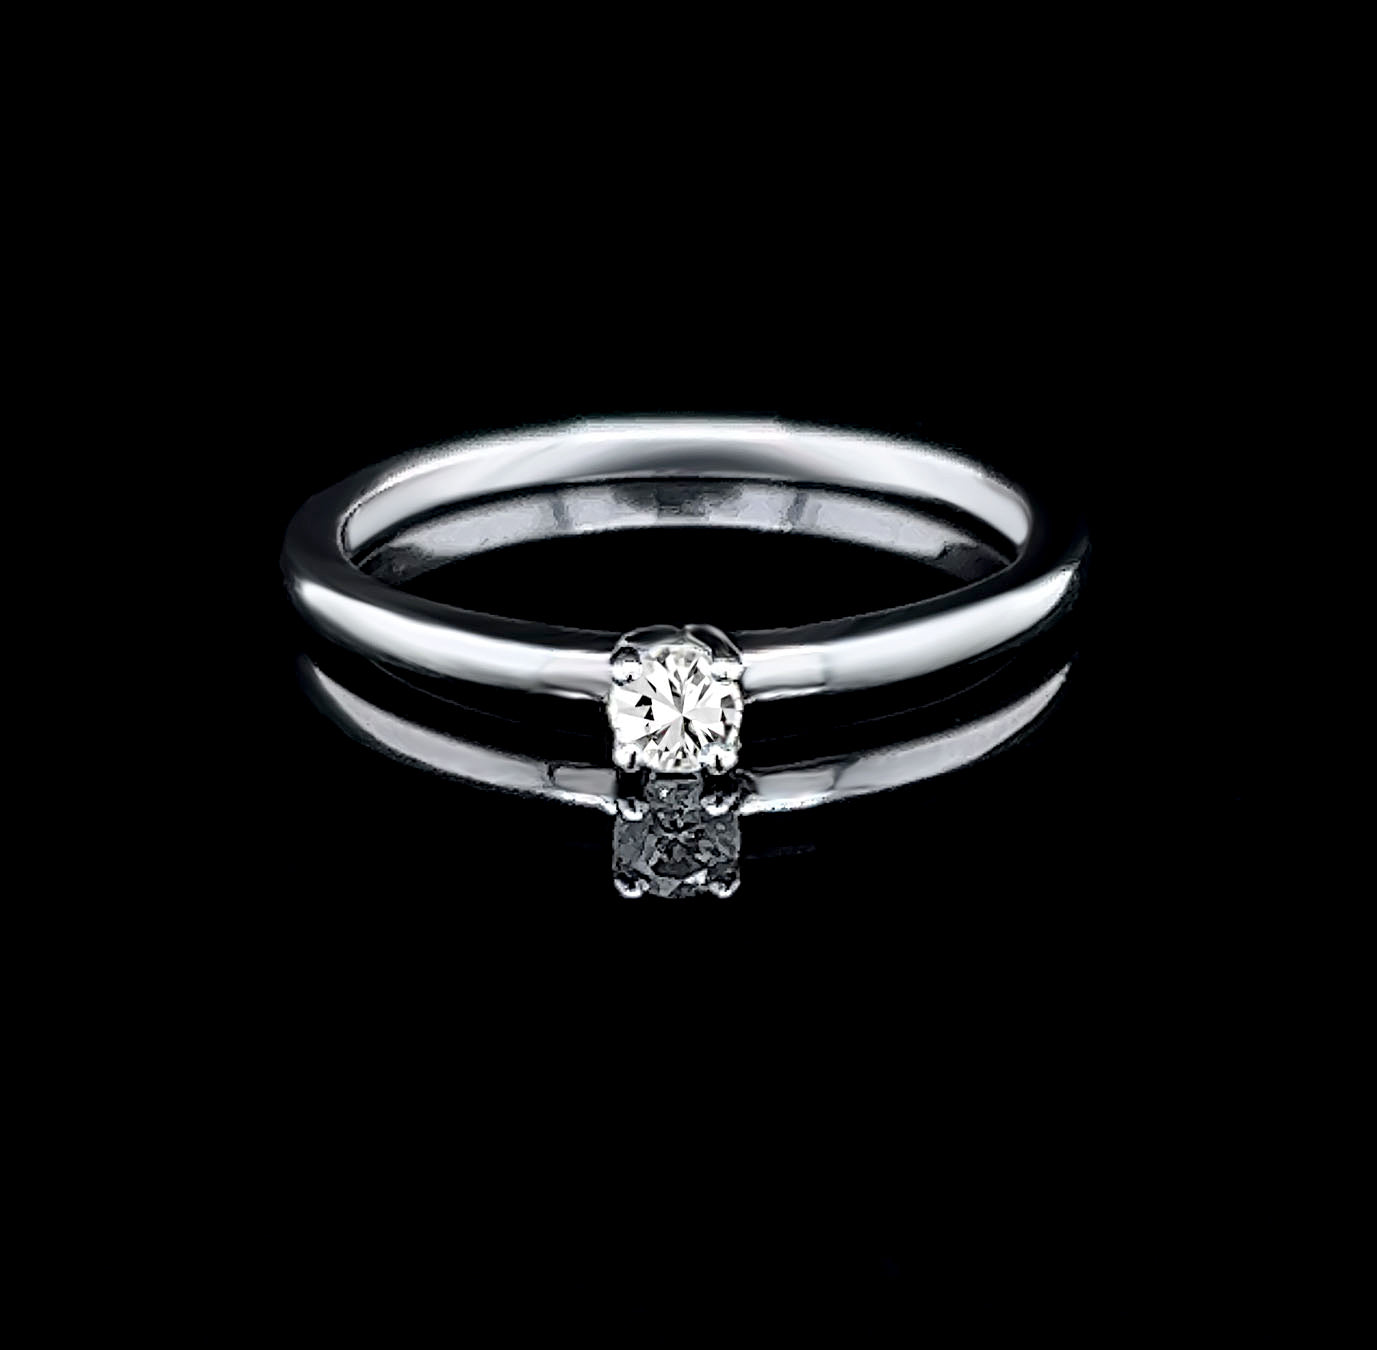 White Gold Solitaire Diamond Engagement Ring